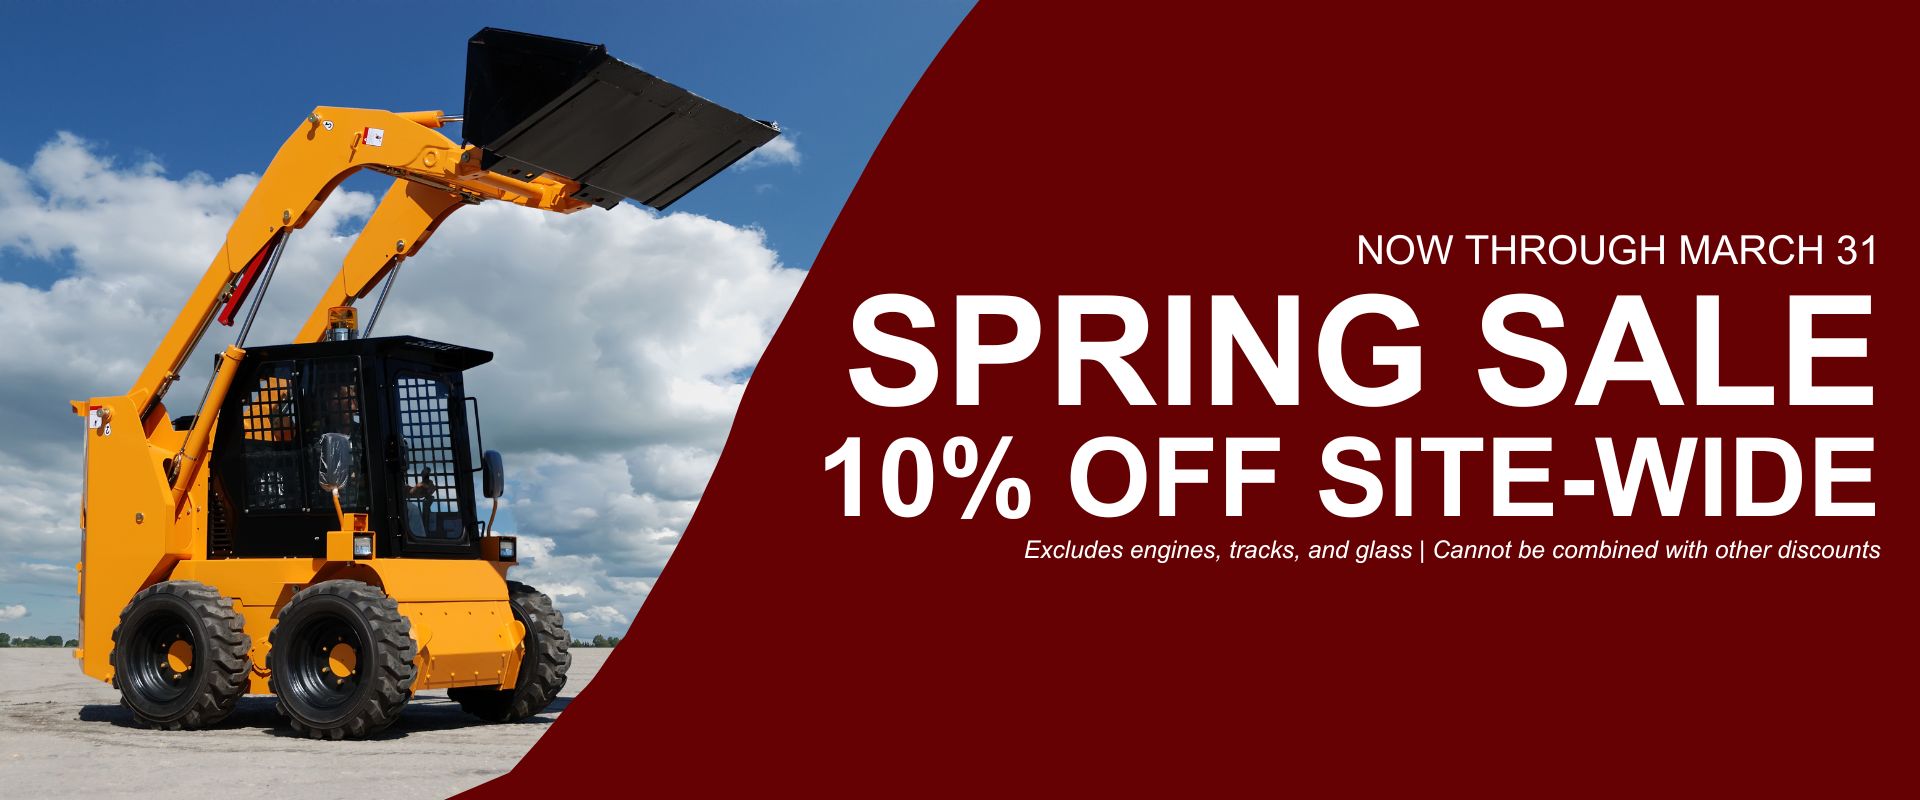 Spring Sale! 10% off Site-Wide!